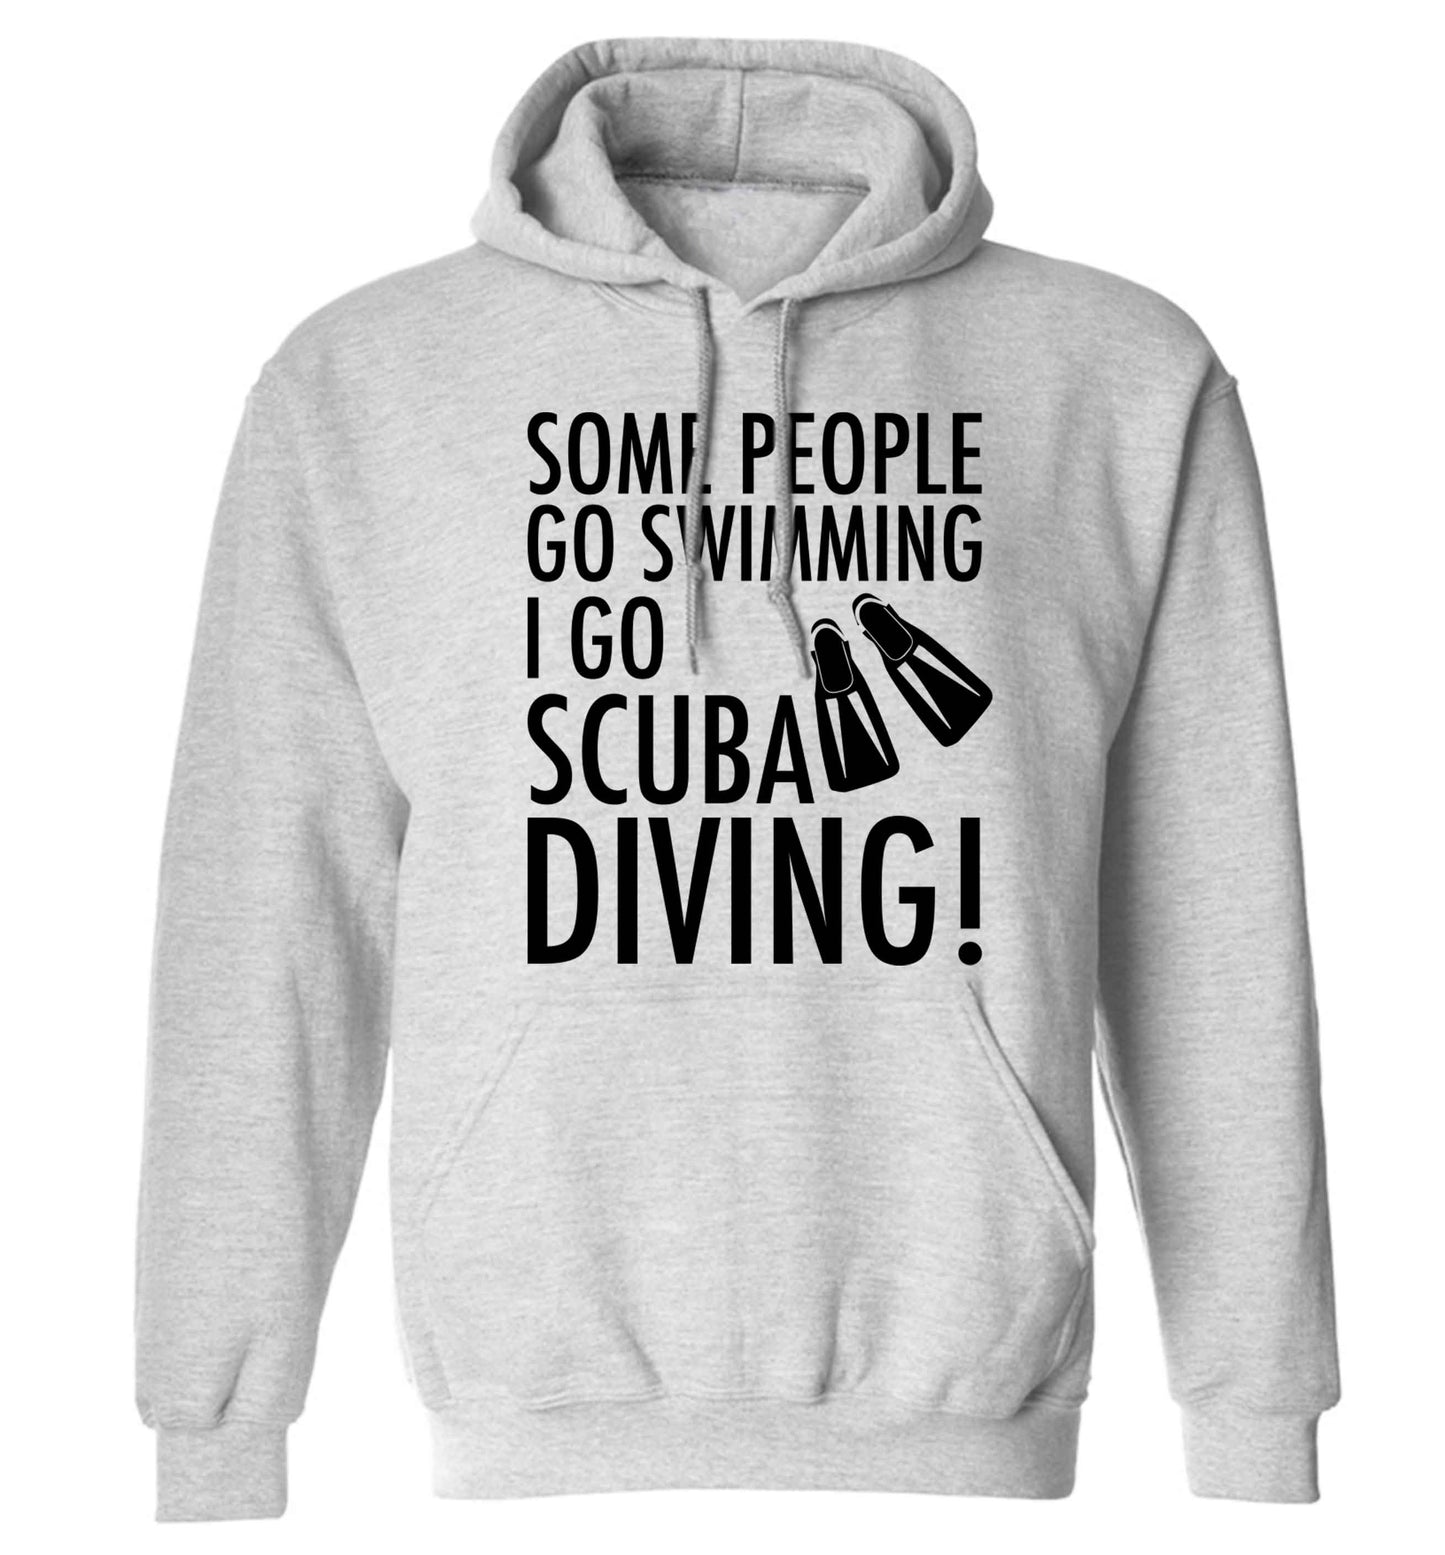 Some people go swimming I go scuba diving! adults unisex grey hoodie 2XL